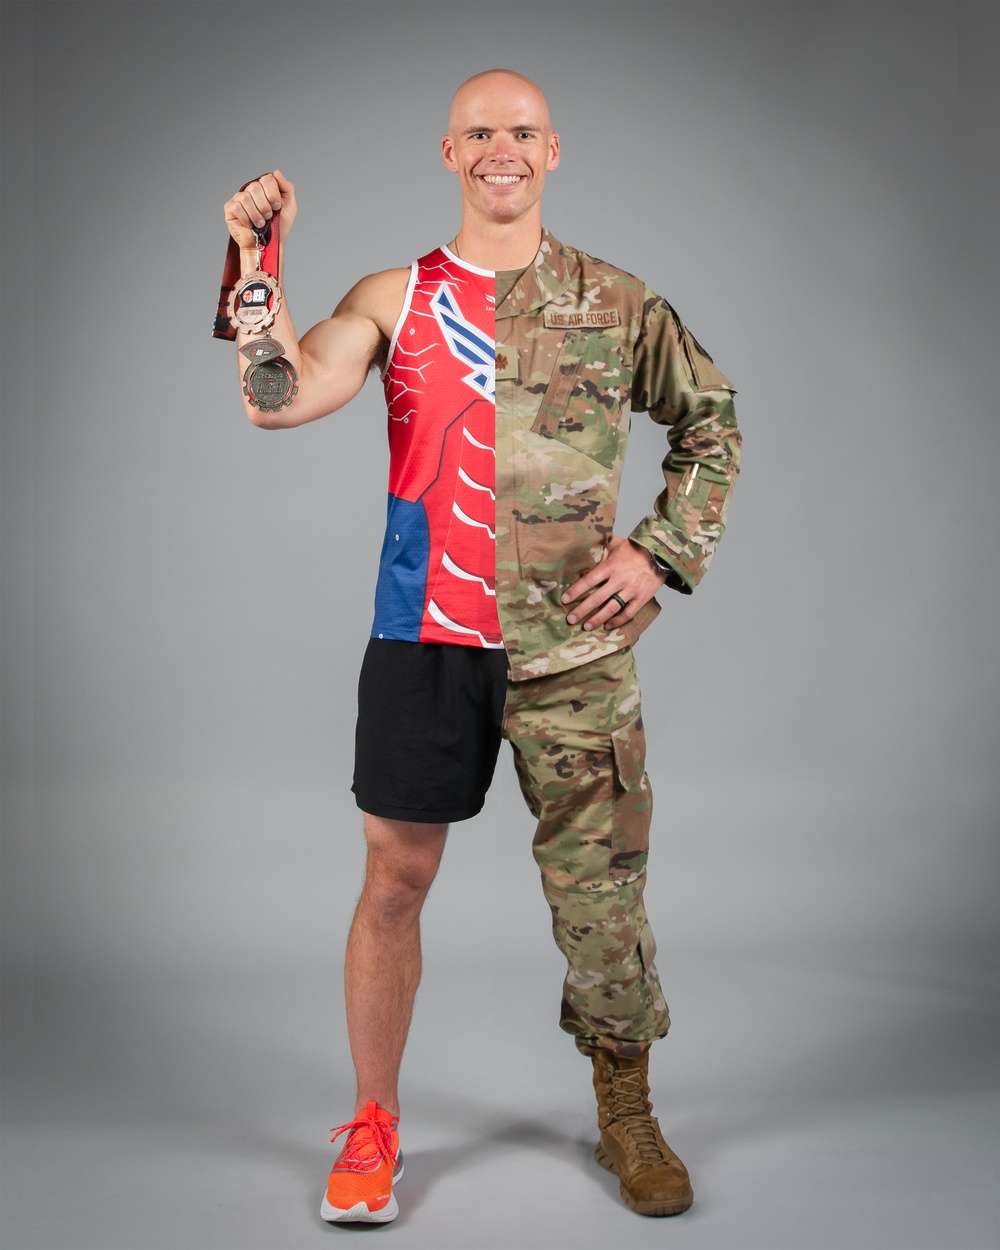 Ohio Air National Guard member earns 2023 Athlete of the Year for ANG